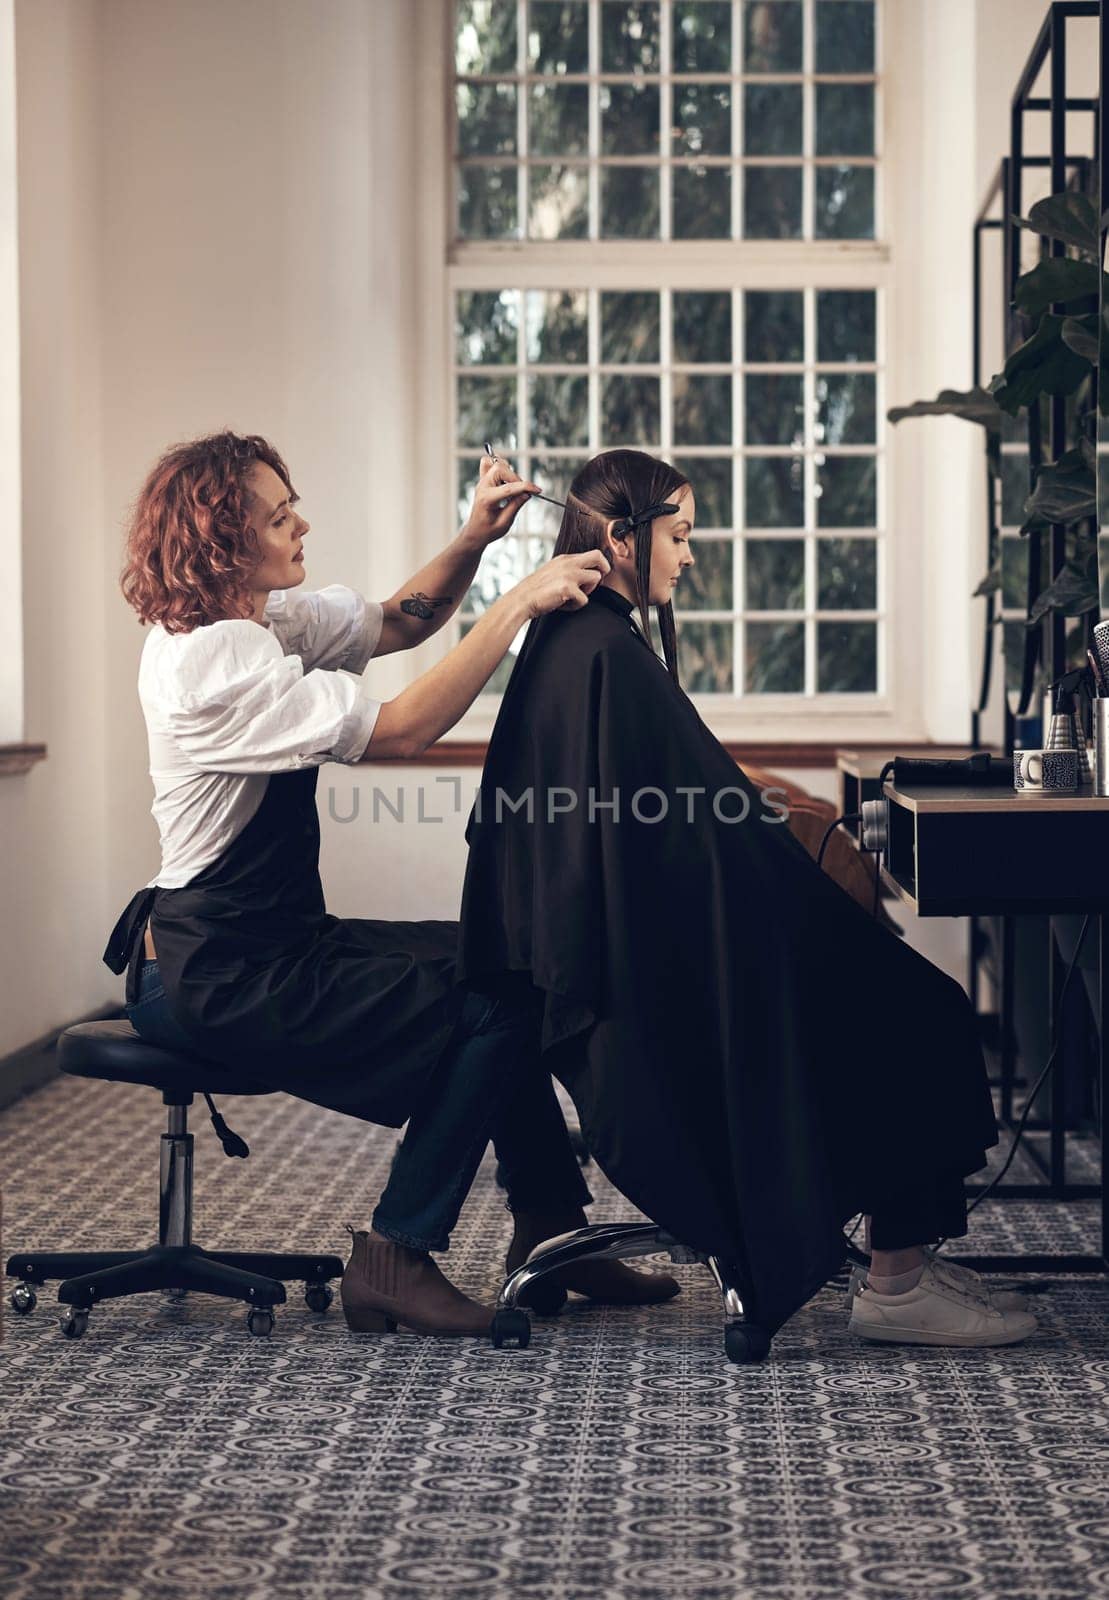 Blessed are the hairstylists, for they bring out the beauty in others. a young woman getting her hair cut in a salon